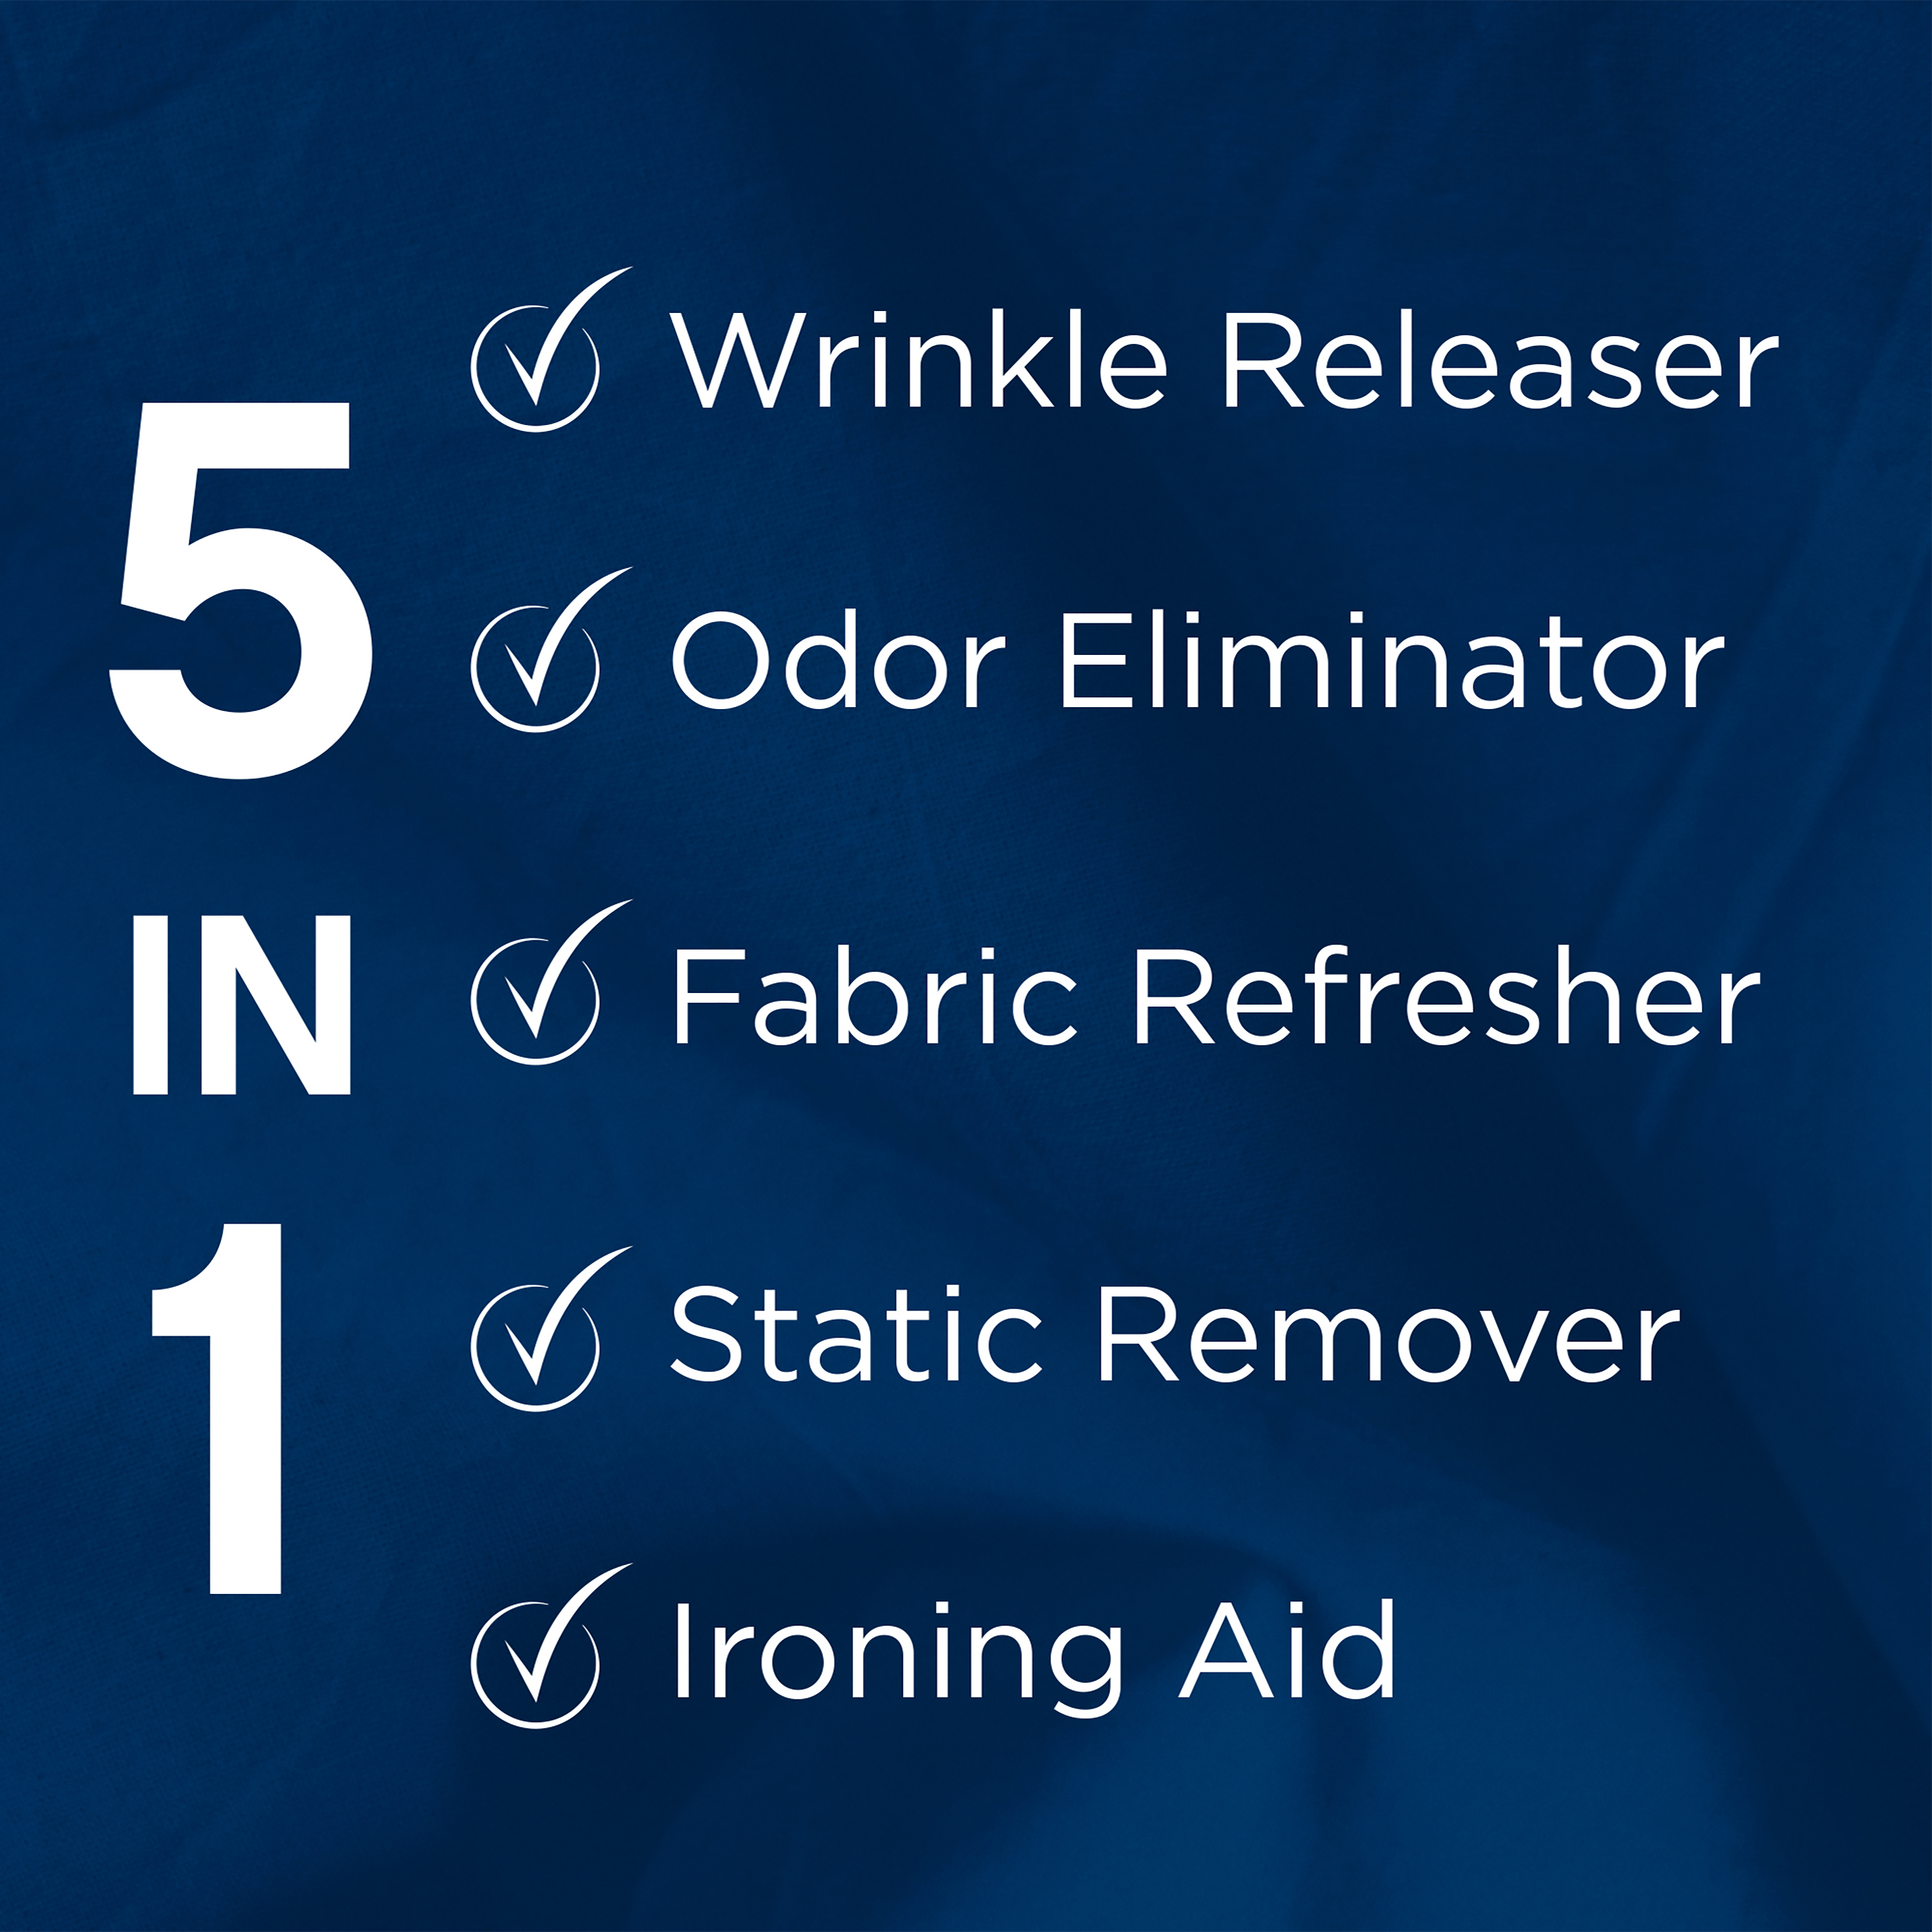 Downy Wrinkle Releaser and Refresher Fabric Spray, Starch Alternative, Fresh Scent, 9.7 oz - image 5 of 10